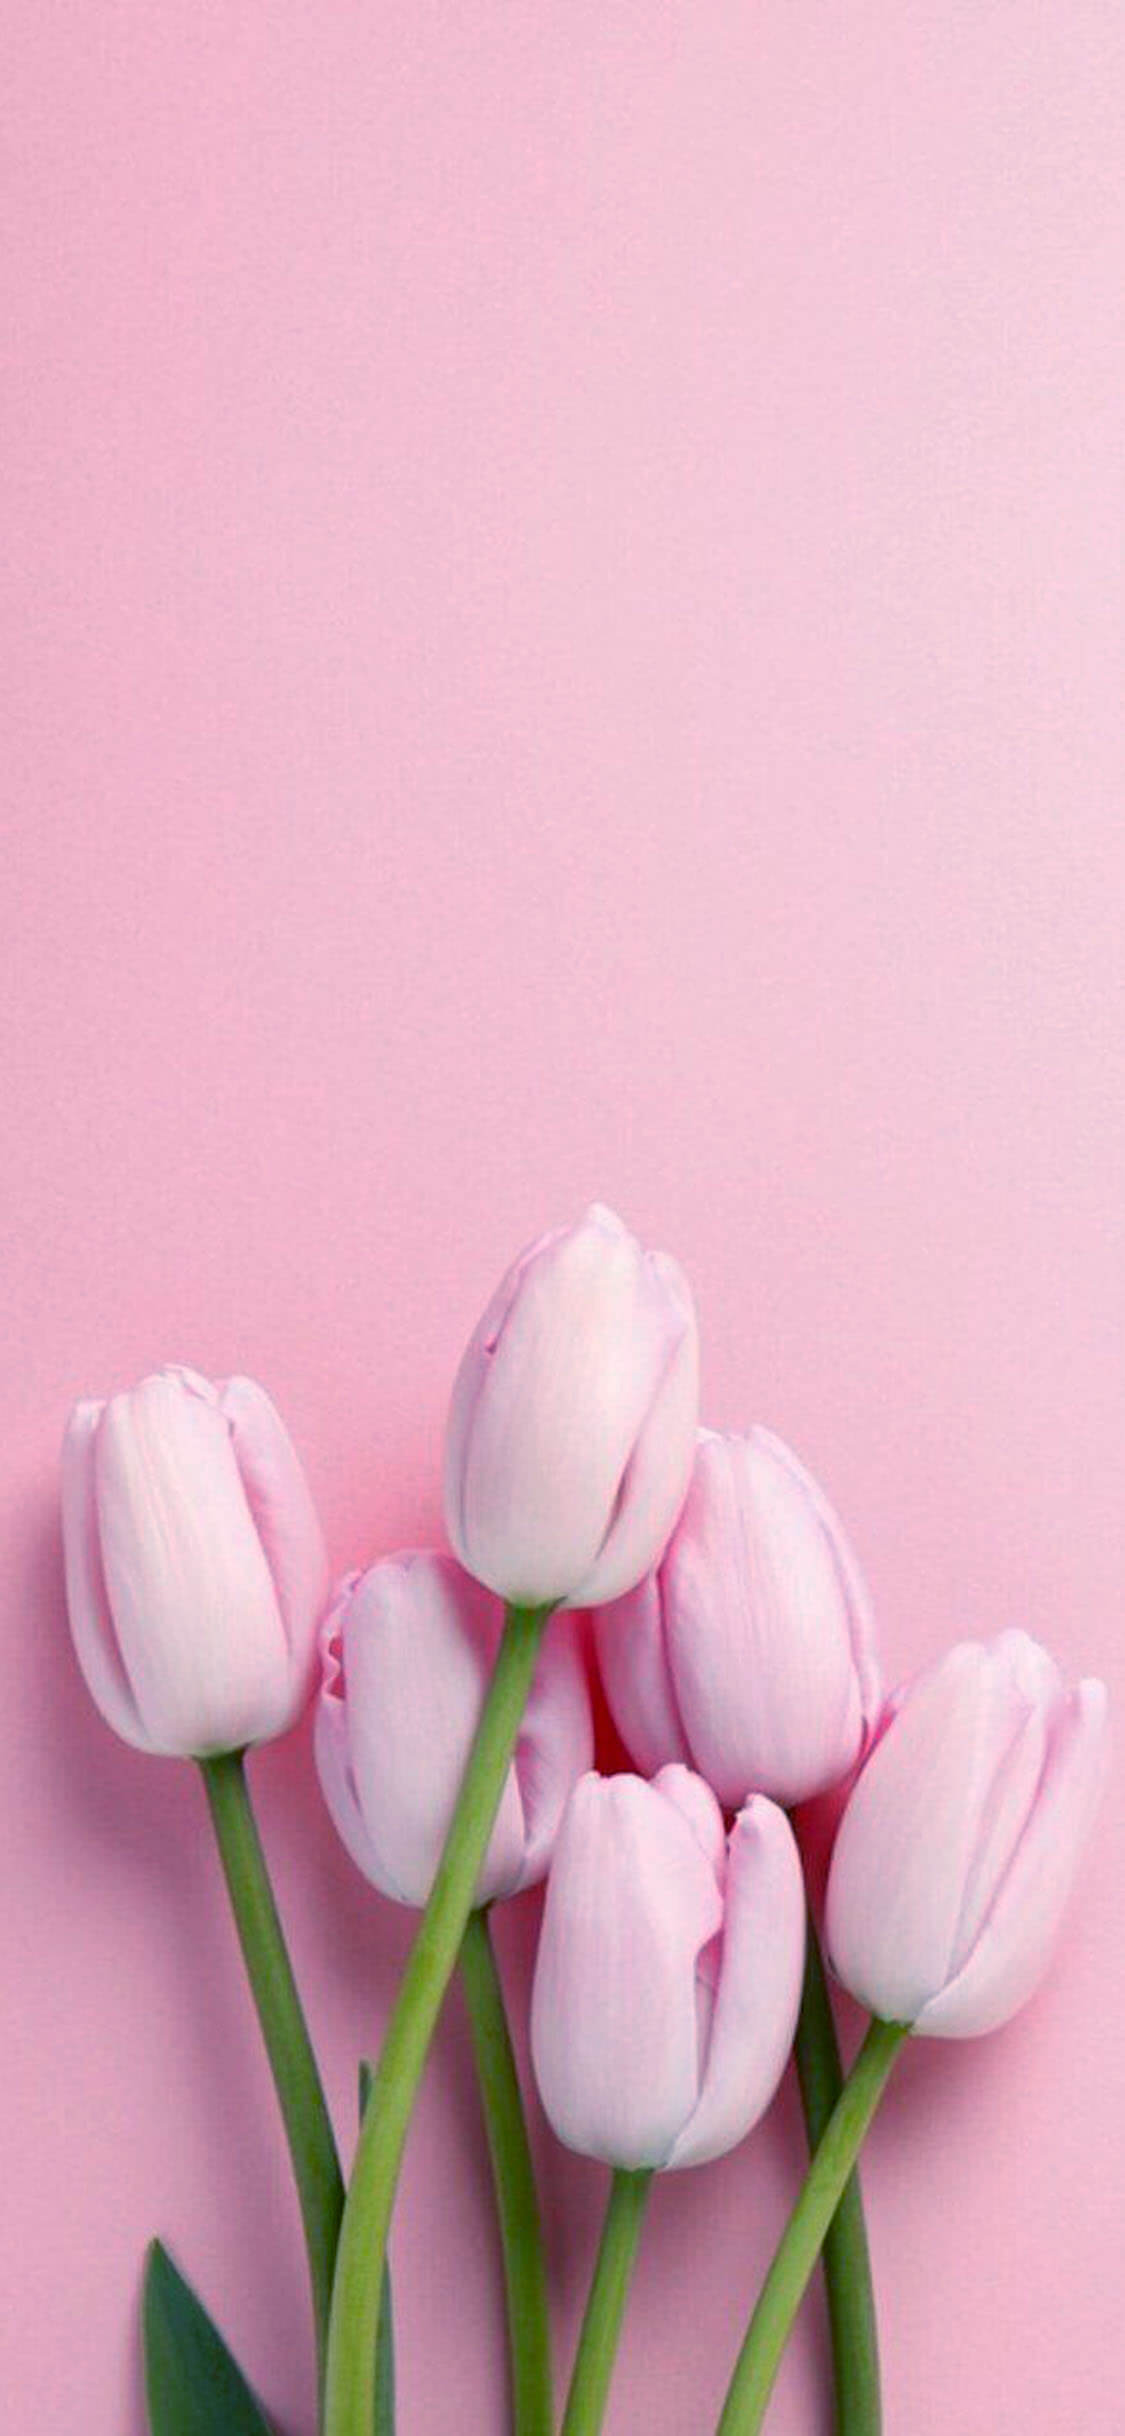 28+ Best Flowers iPhone Wallpapers & Backgrounds - Templatefor